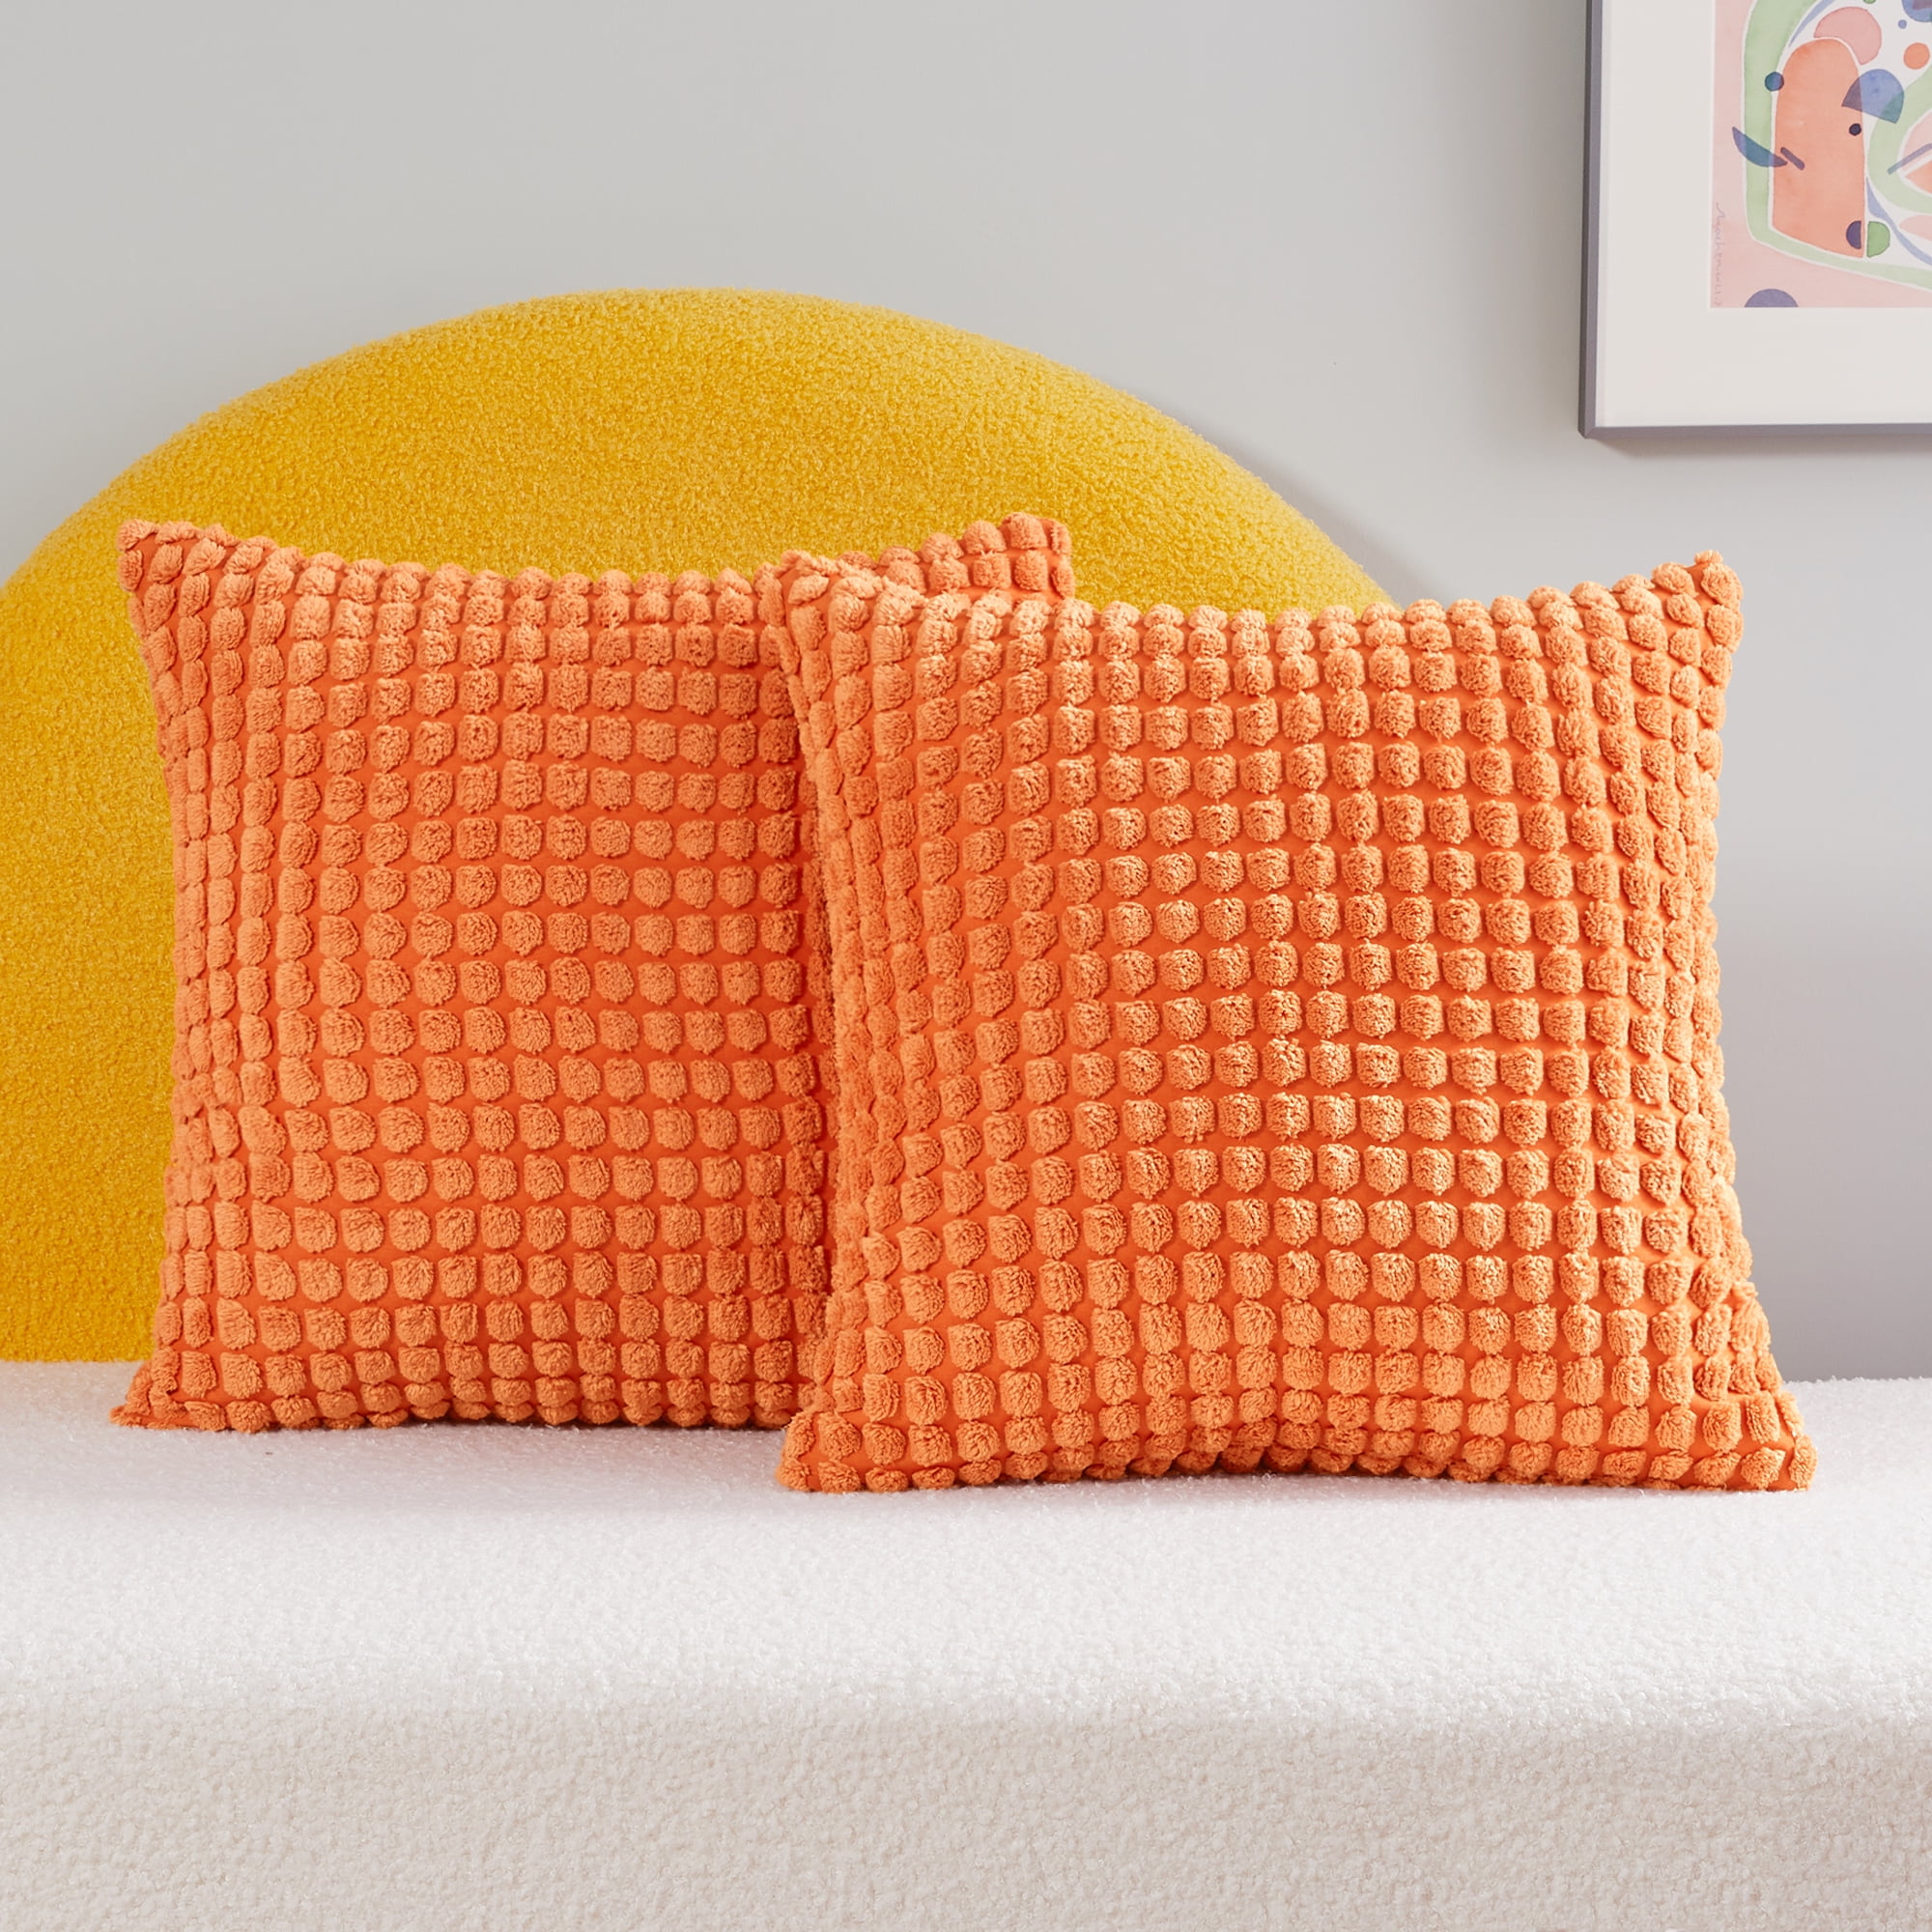 Deconovo Home Decorative Hand Made Pillow Wooden Pattern Pillow Cover Throw Cushion Cover for Sofa 18 x 18 inch Orange 